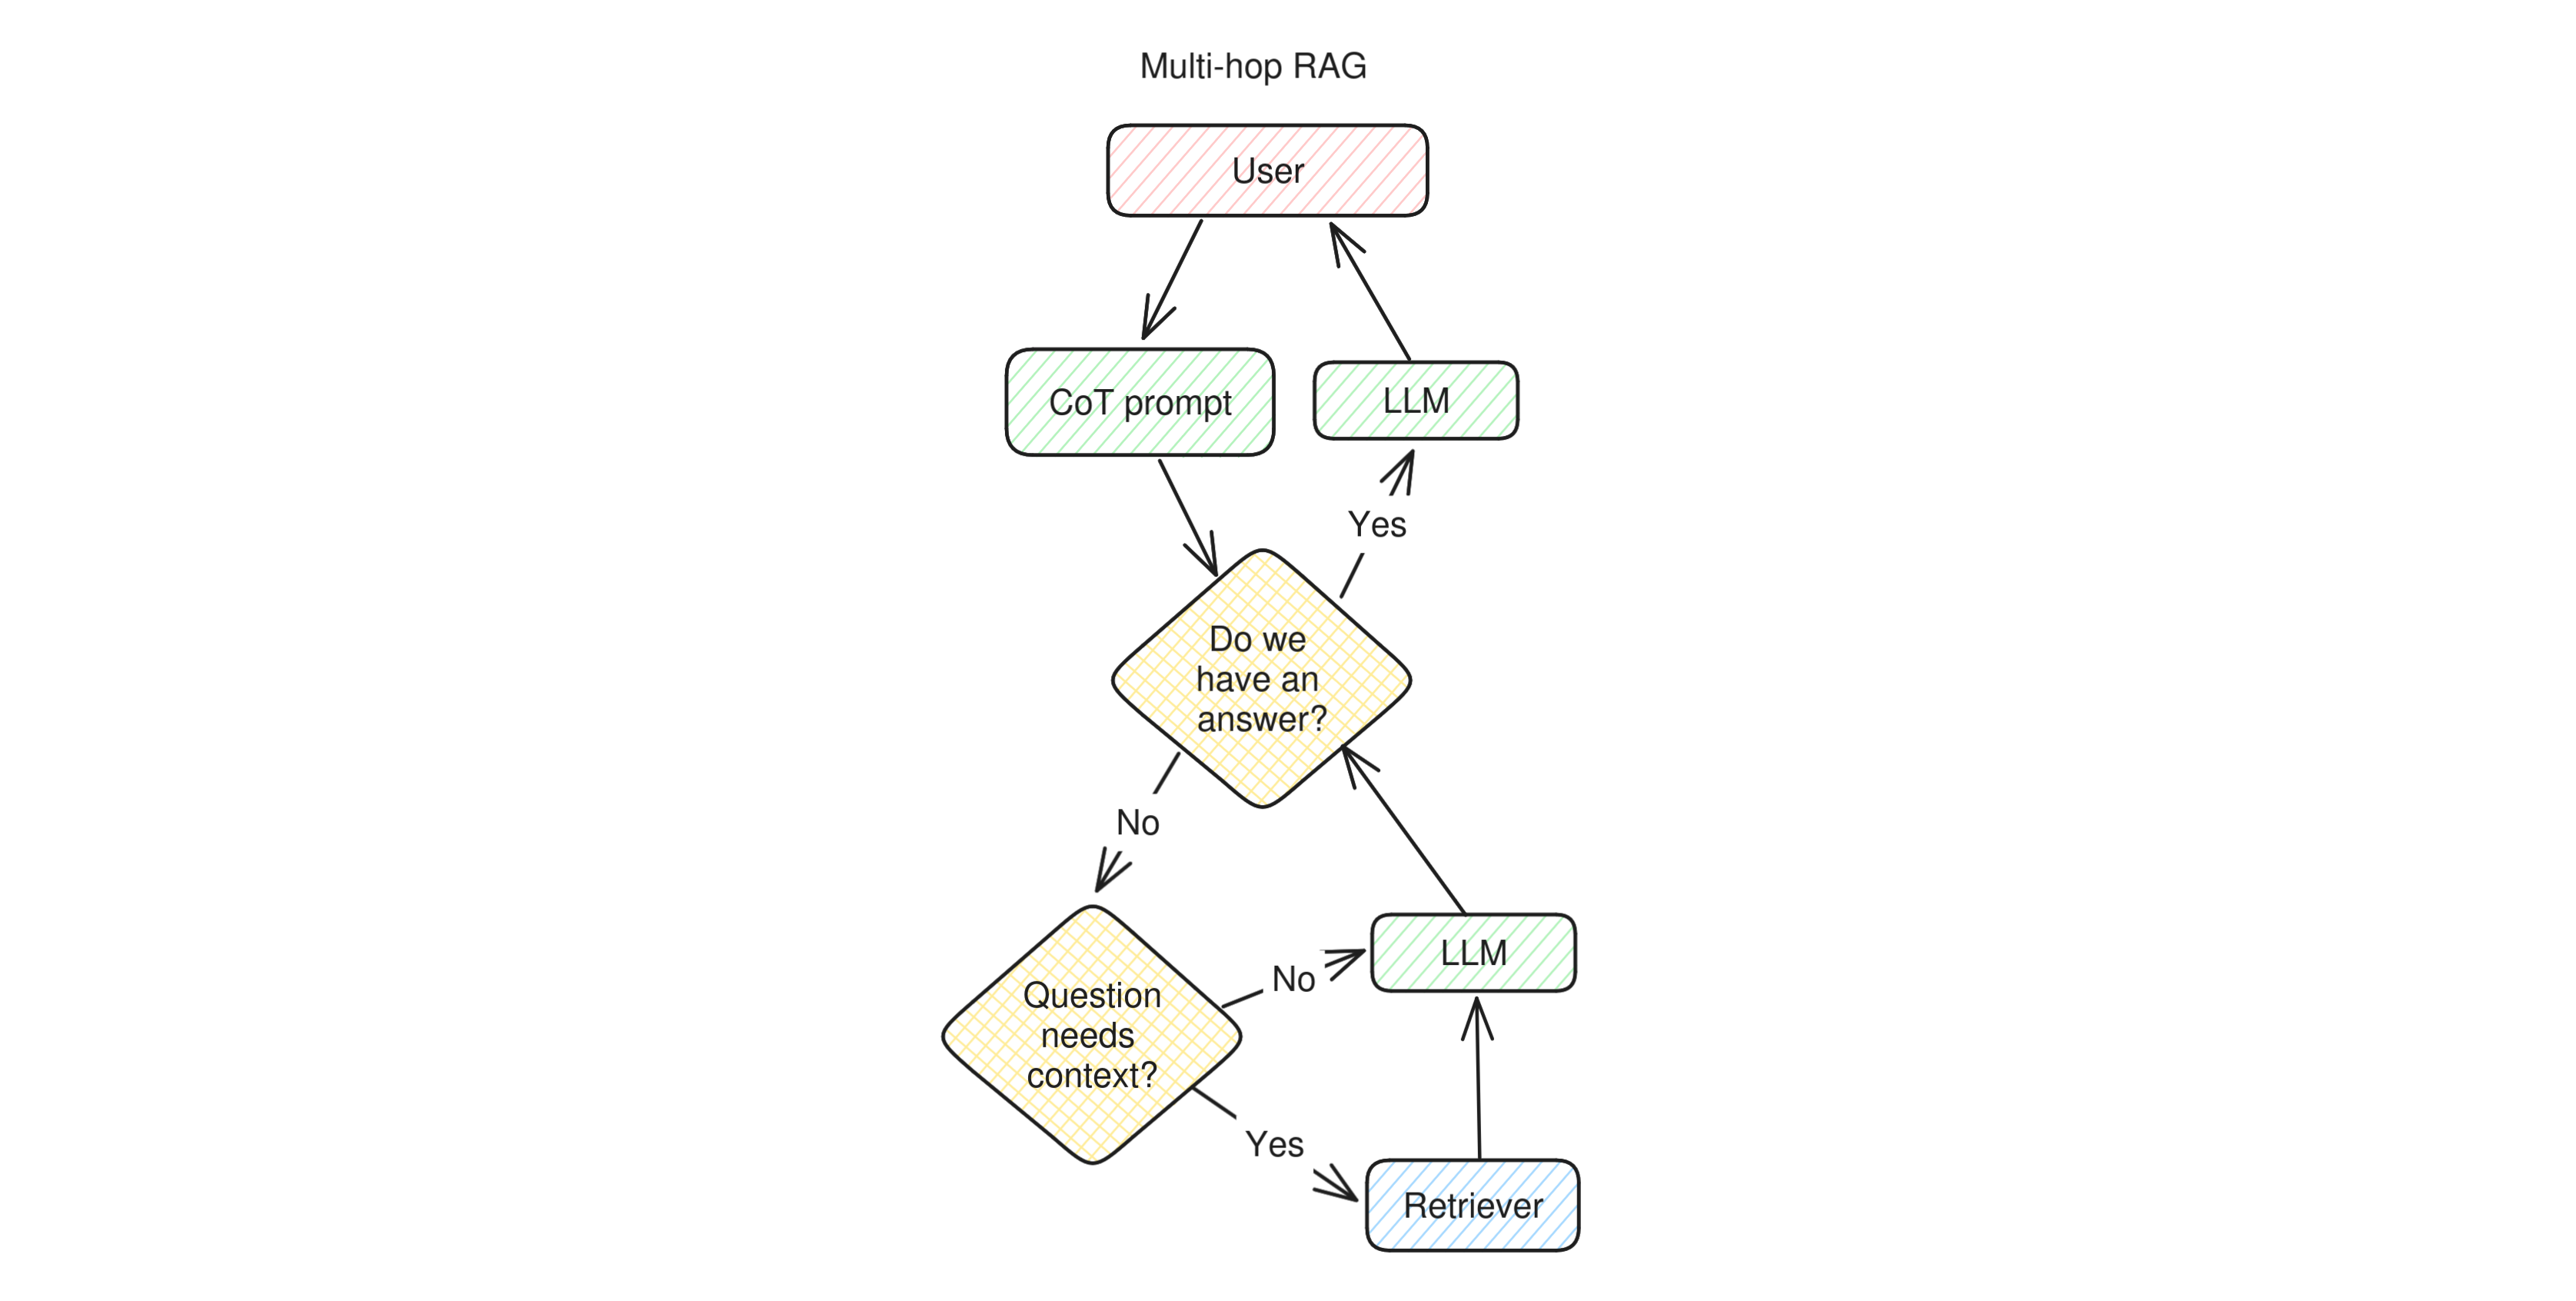 Diagram of the operation of multi-hop RAG: when the user makes a question, a chain of thought prompt is generated and sent to the LLM. The LLM assesses whether it knows the answer to the question and if not, asks itself whether a retrieval is necessary. If it decides that retrieval is necessary it calls it, otherwise it skips it and generates an answer directly. It then checks again whether the question is answered. Exiting the loop, the LLM produces a complete answer by re-reading its own inner monologue and returns this reply to the user.